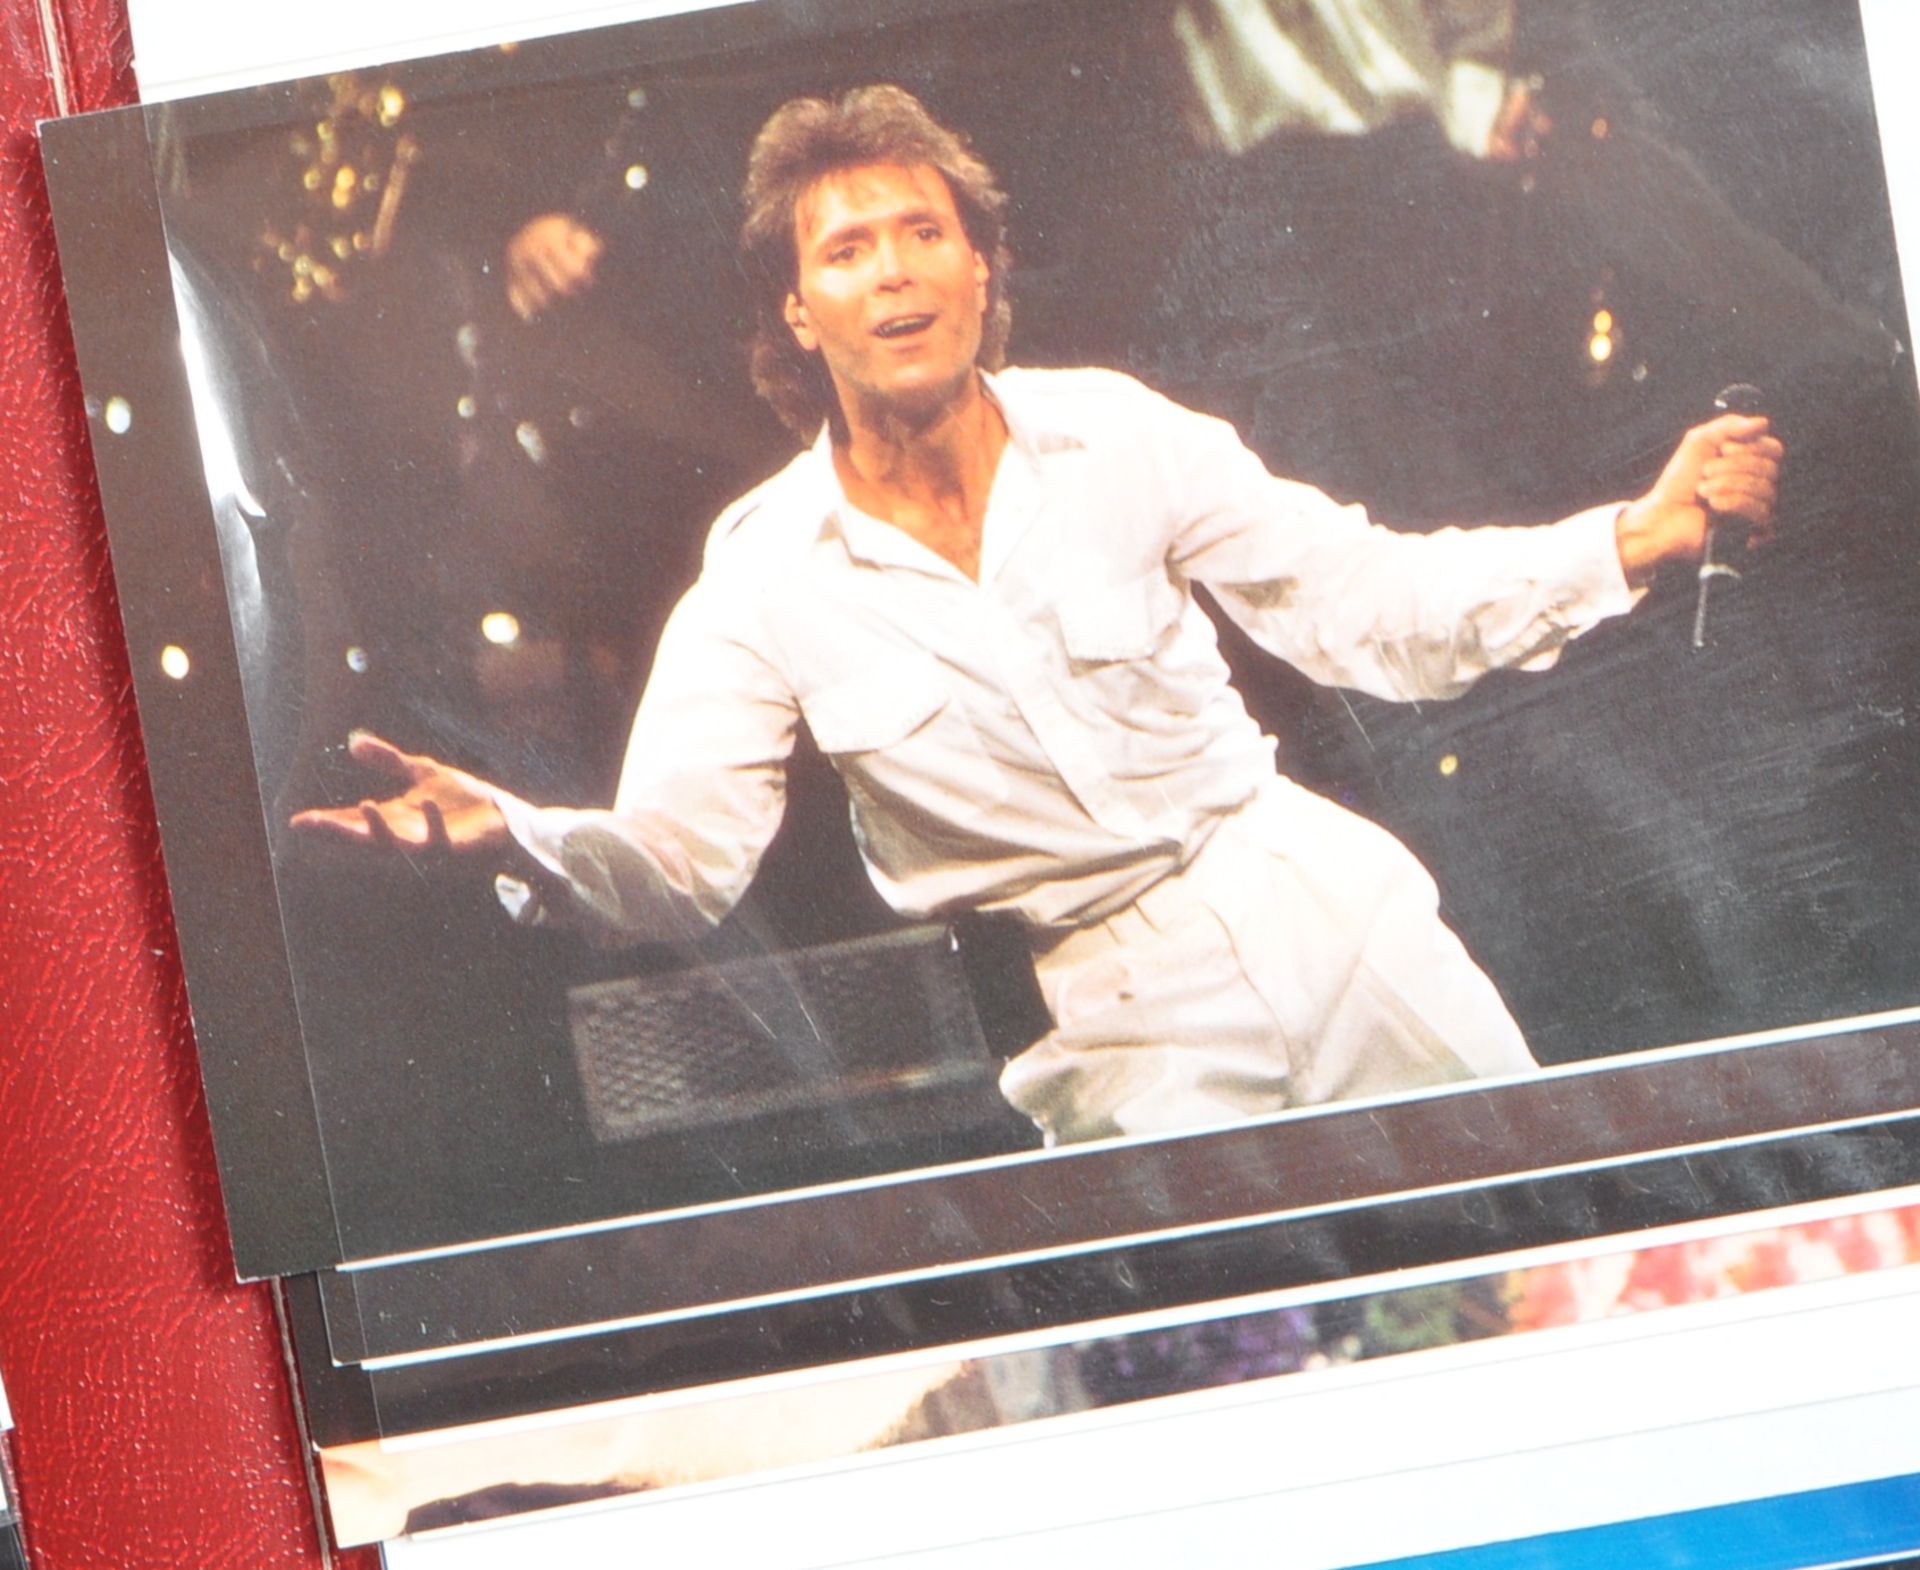 SIR CLIFF RICHARD - LARGE EXTENSIVE COLLECTION OF MEMORABILIA - Image 6 of 7